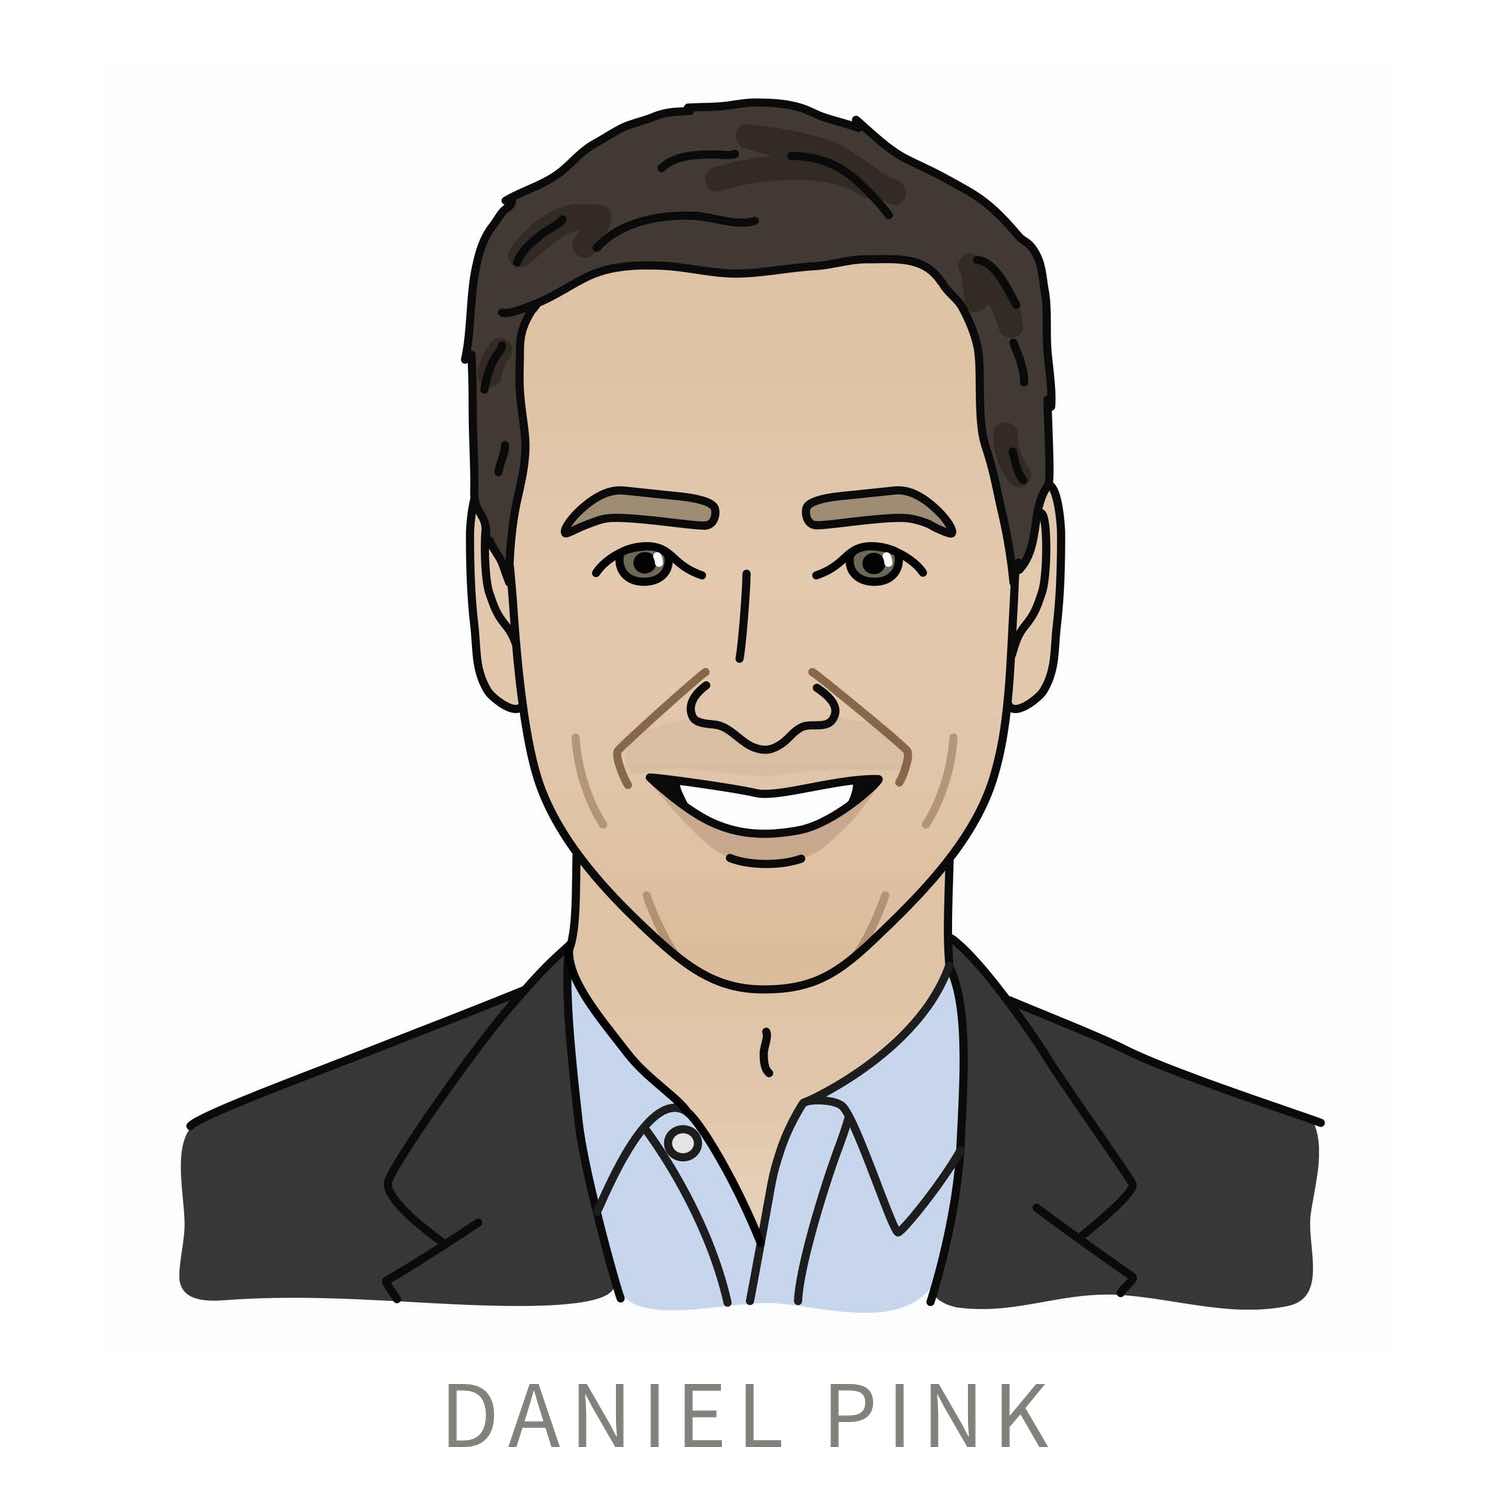 Daniel Pink interview with Intellects.co